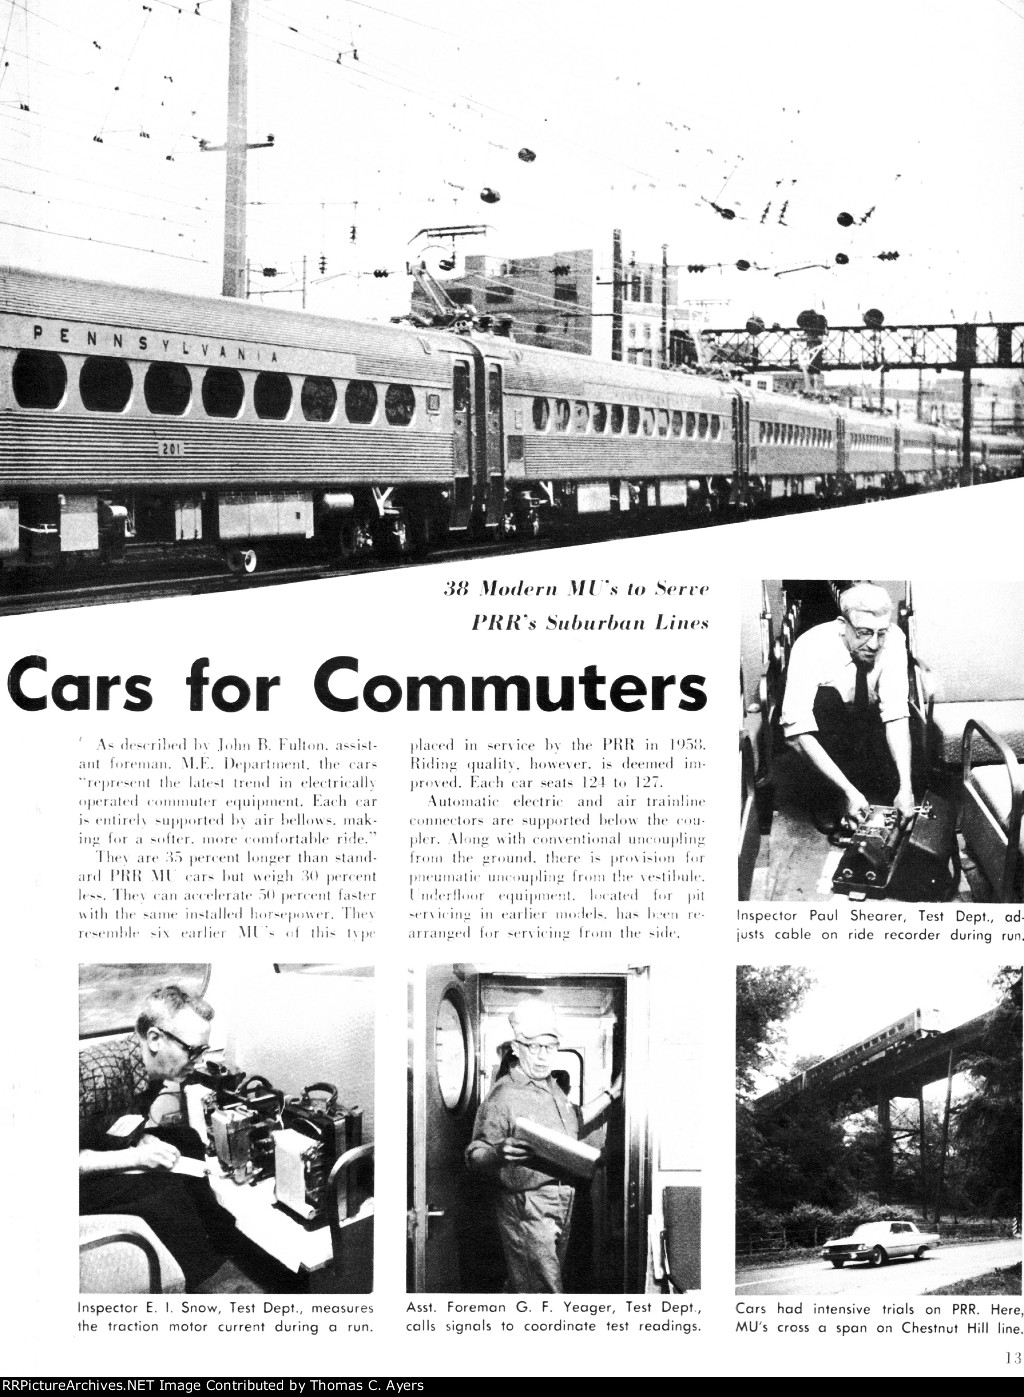 "New Cars For Commuters," Page 13, 1963